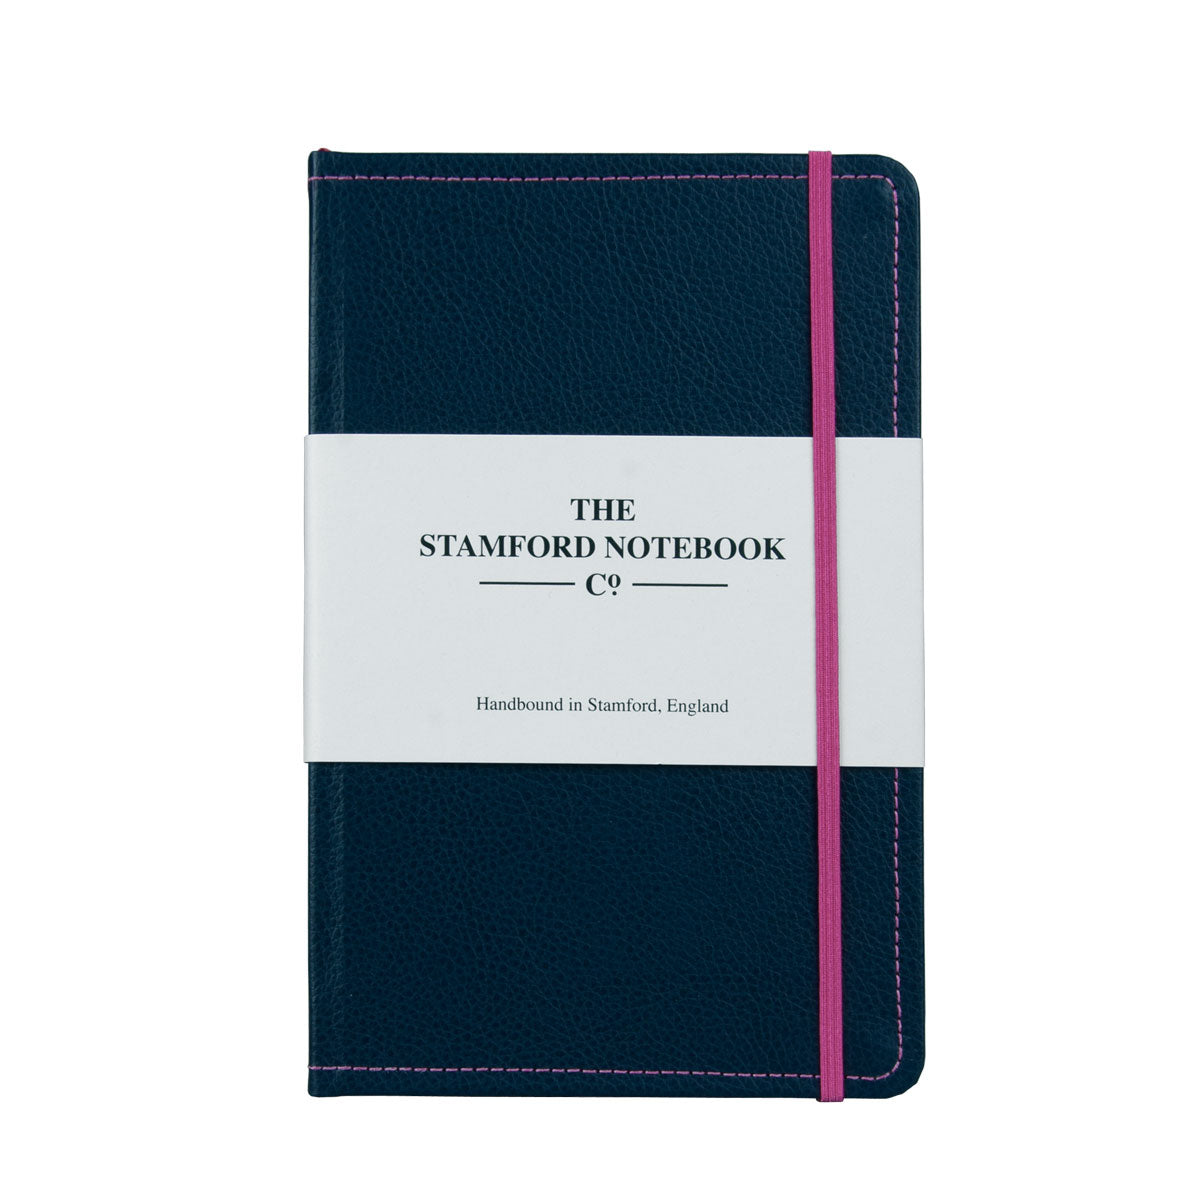 Marine Blue leather notebook with hot pink stitching